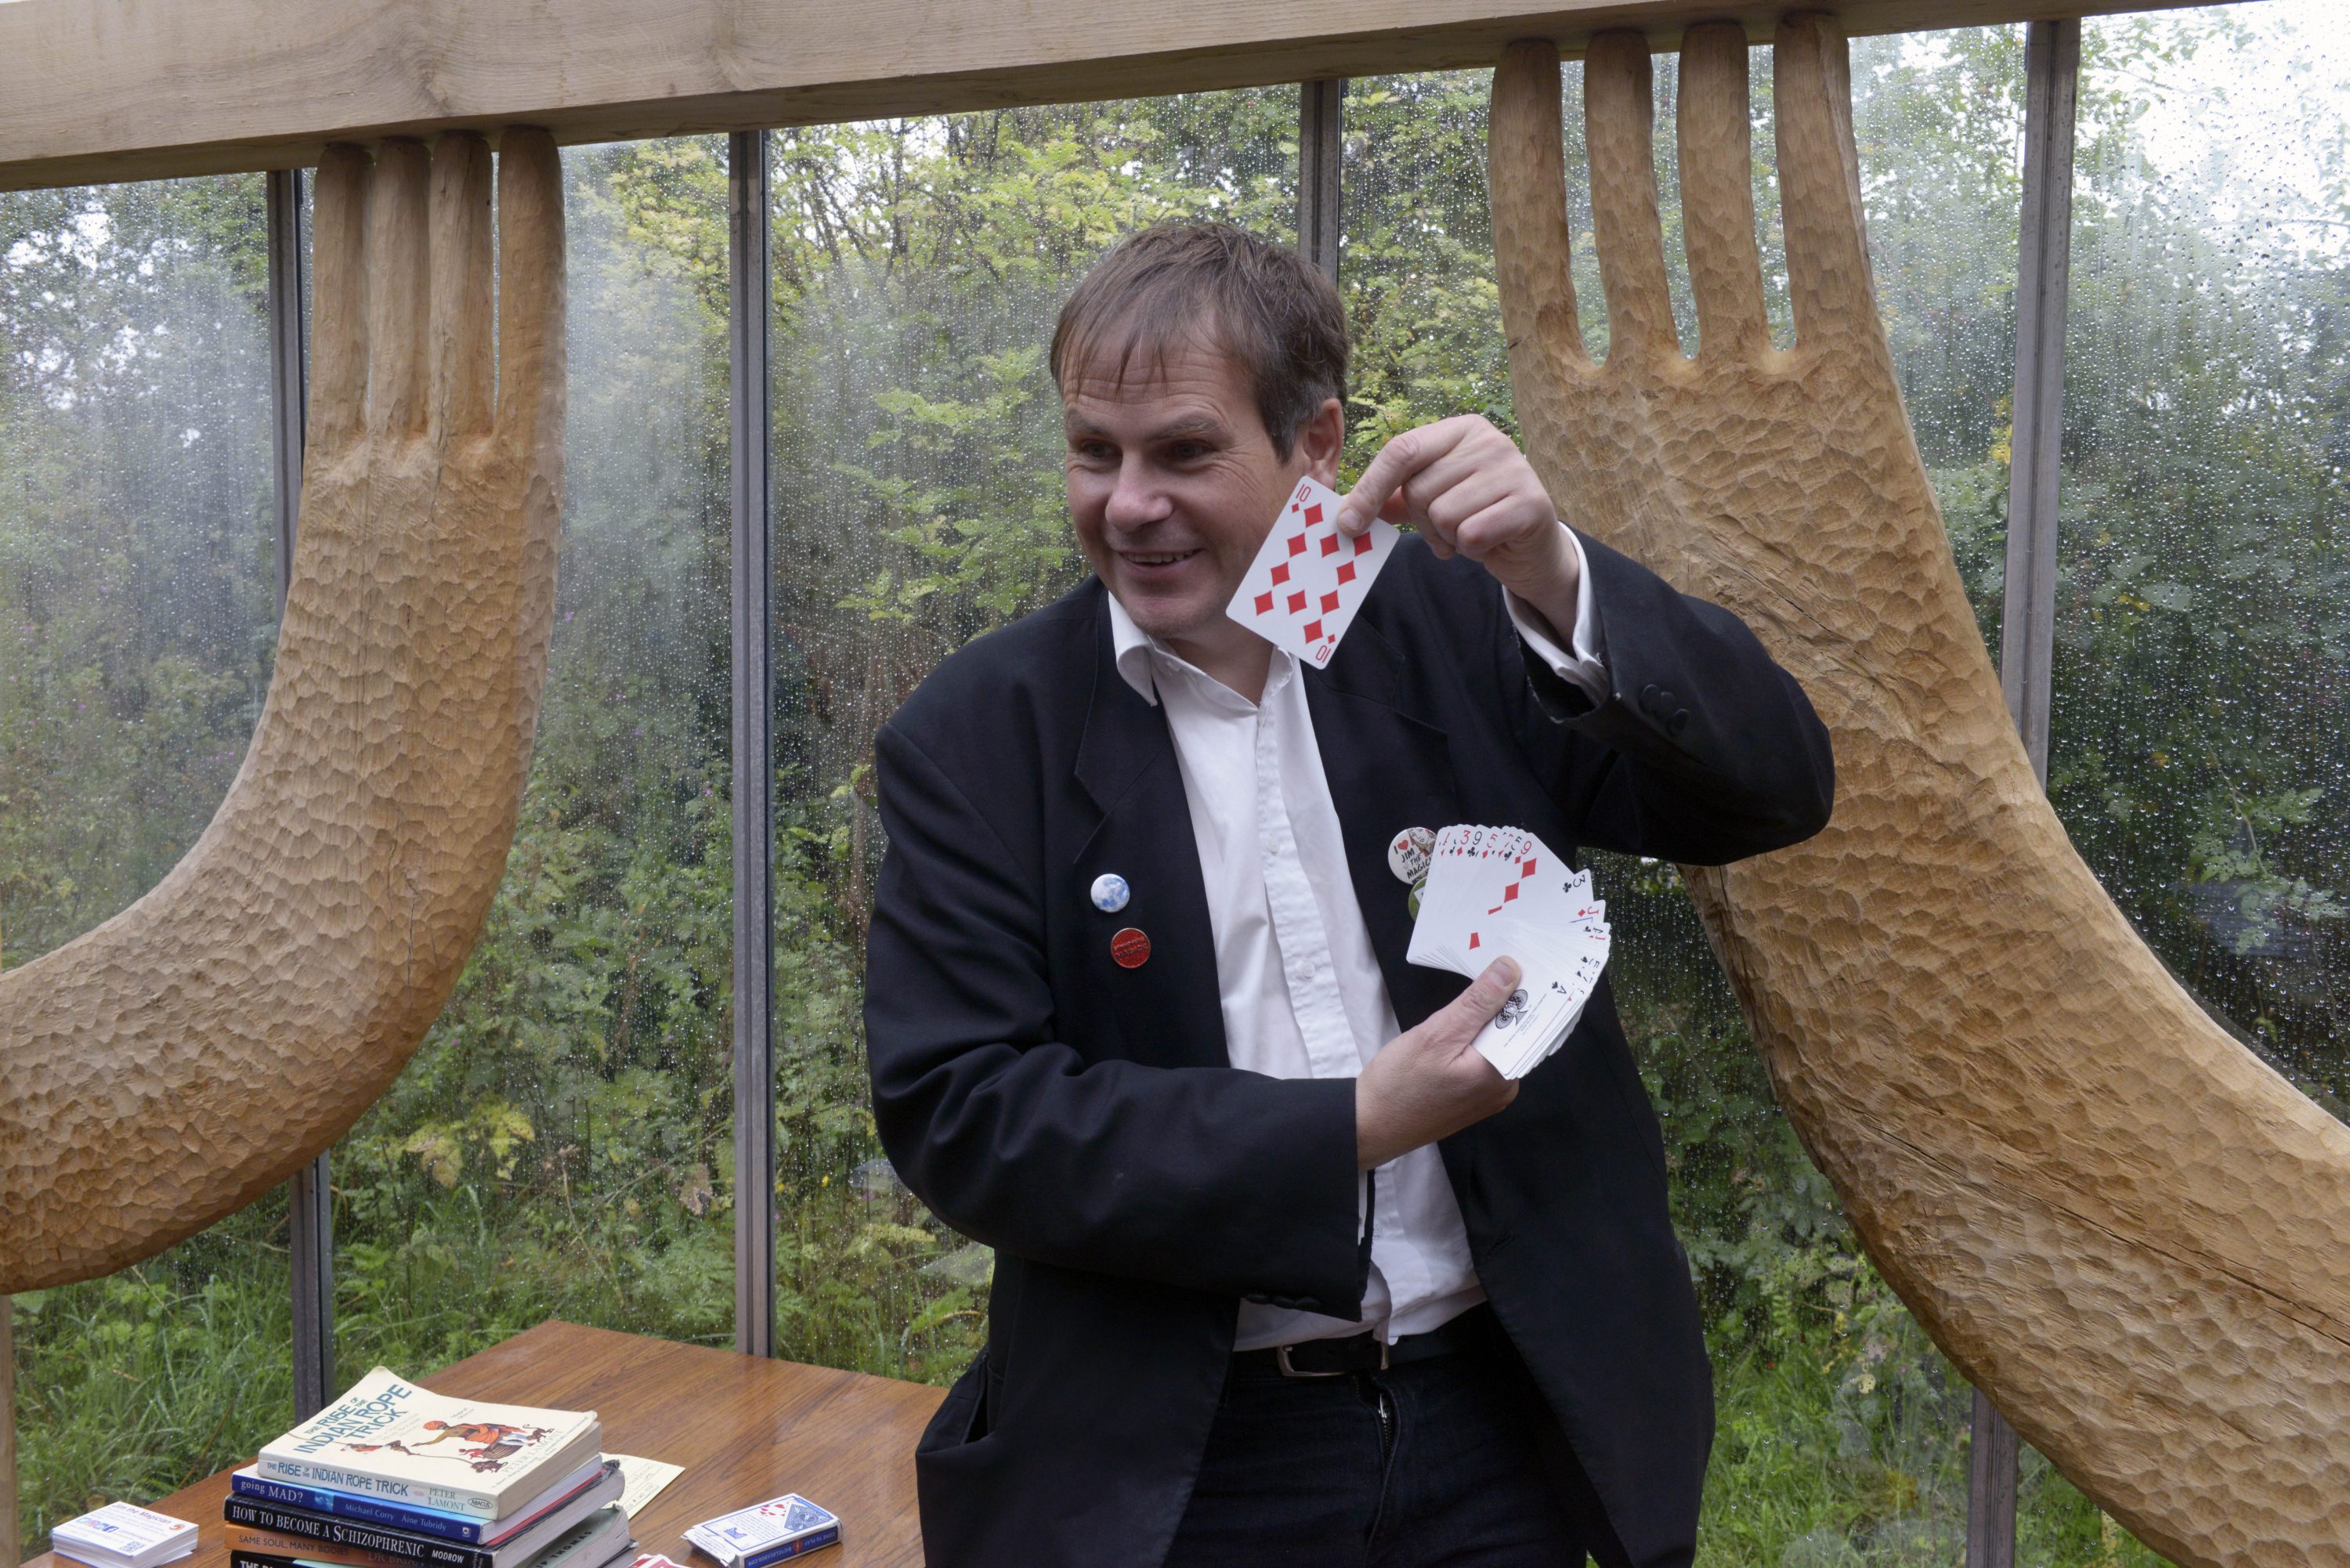 Jim the Magician performing as part of Ruth Ewan’s Sympathetic Magick in Bobby Niven’s Palm House. Commissioned by Edinburgh Art Festival, 2018. Photo: Alan Dimmick.